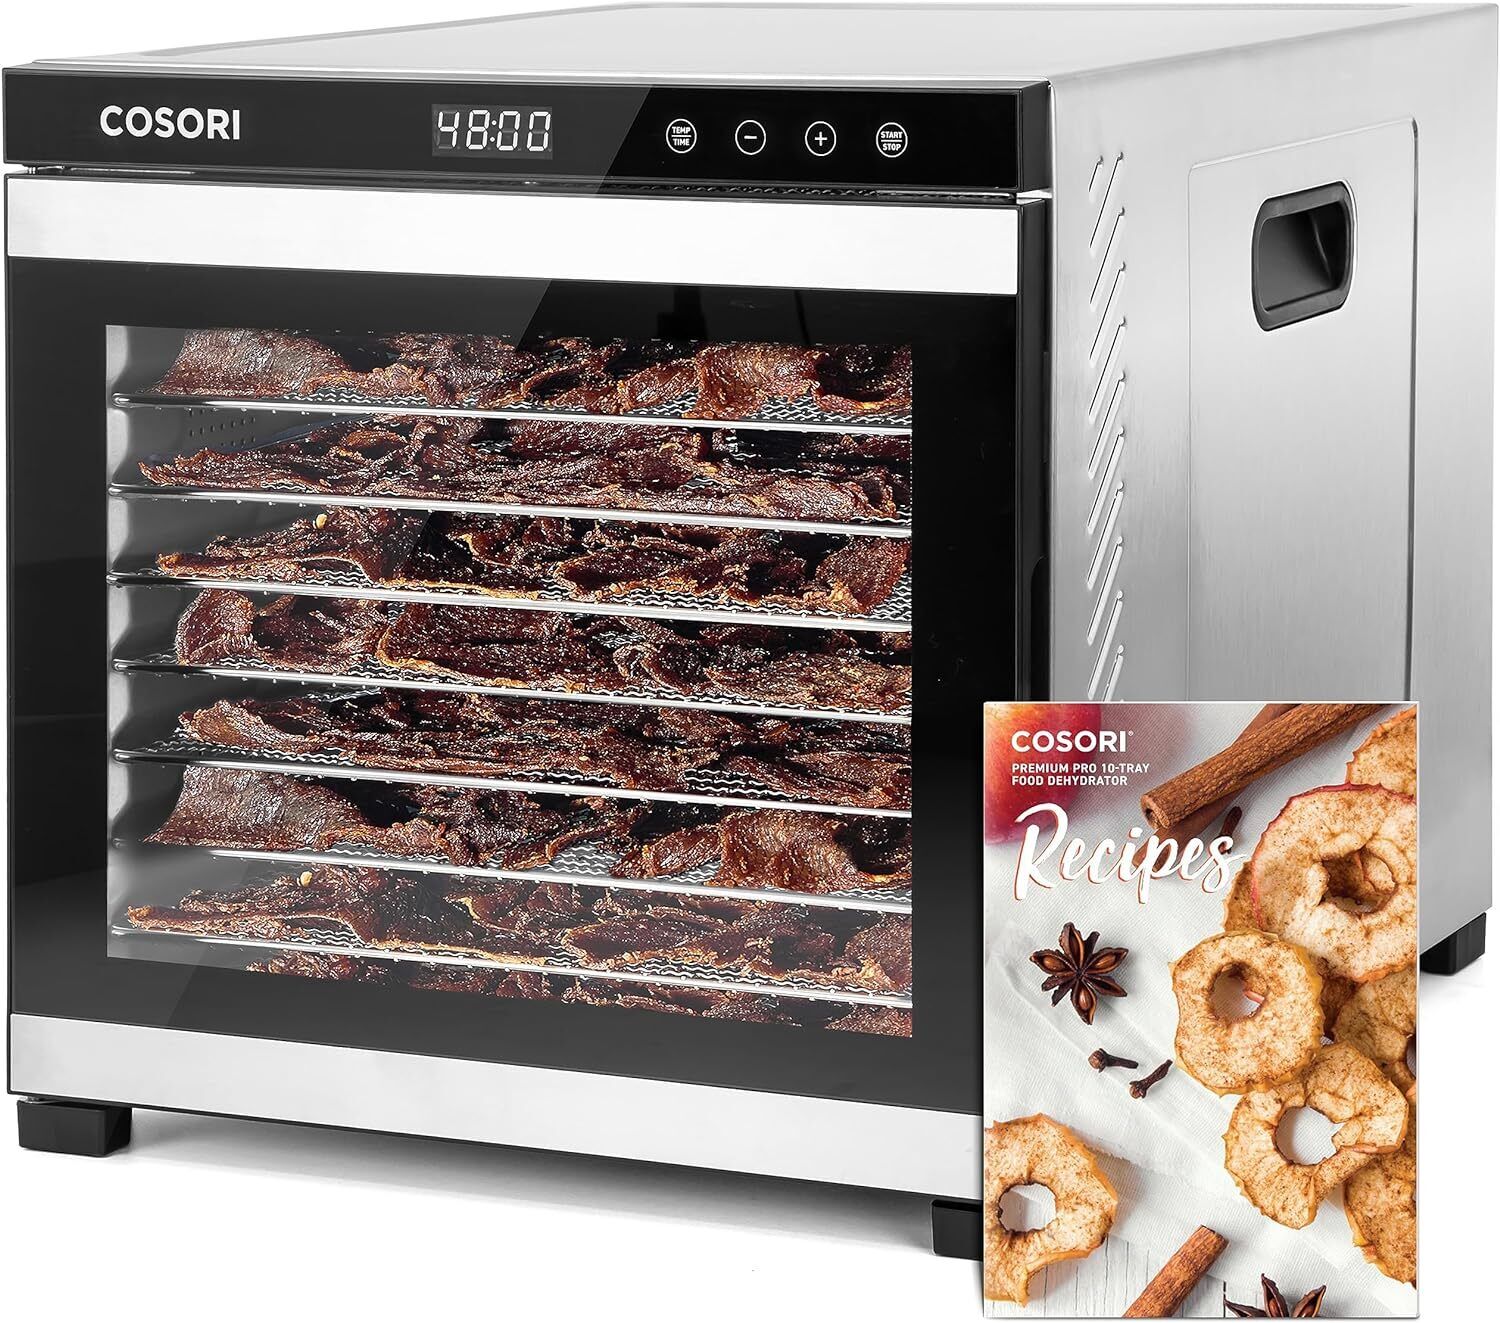 COSORI food dehydrator (for jerky) with 10 stainless steel tray dehydrator